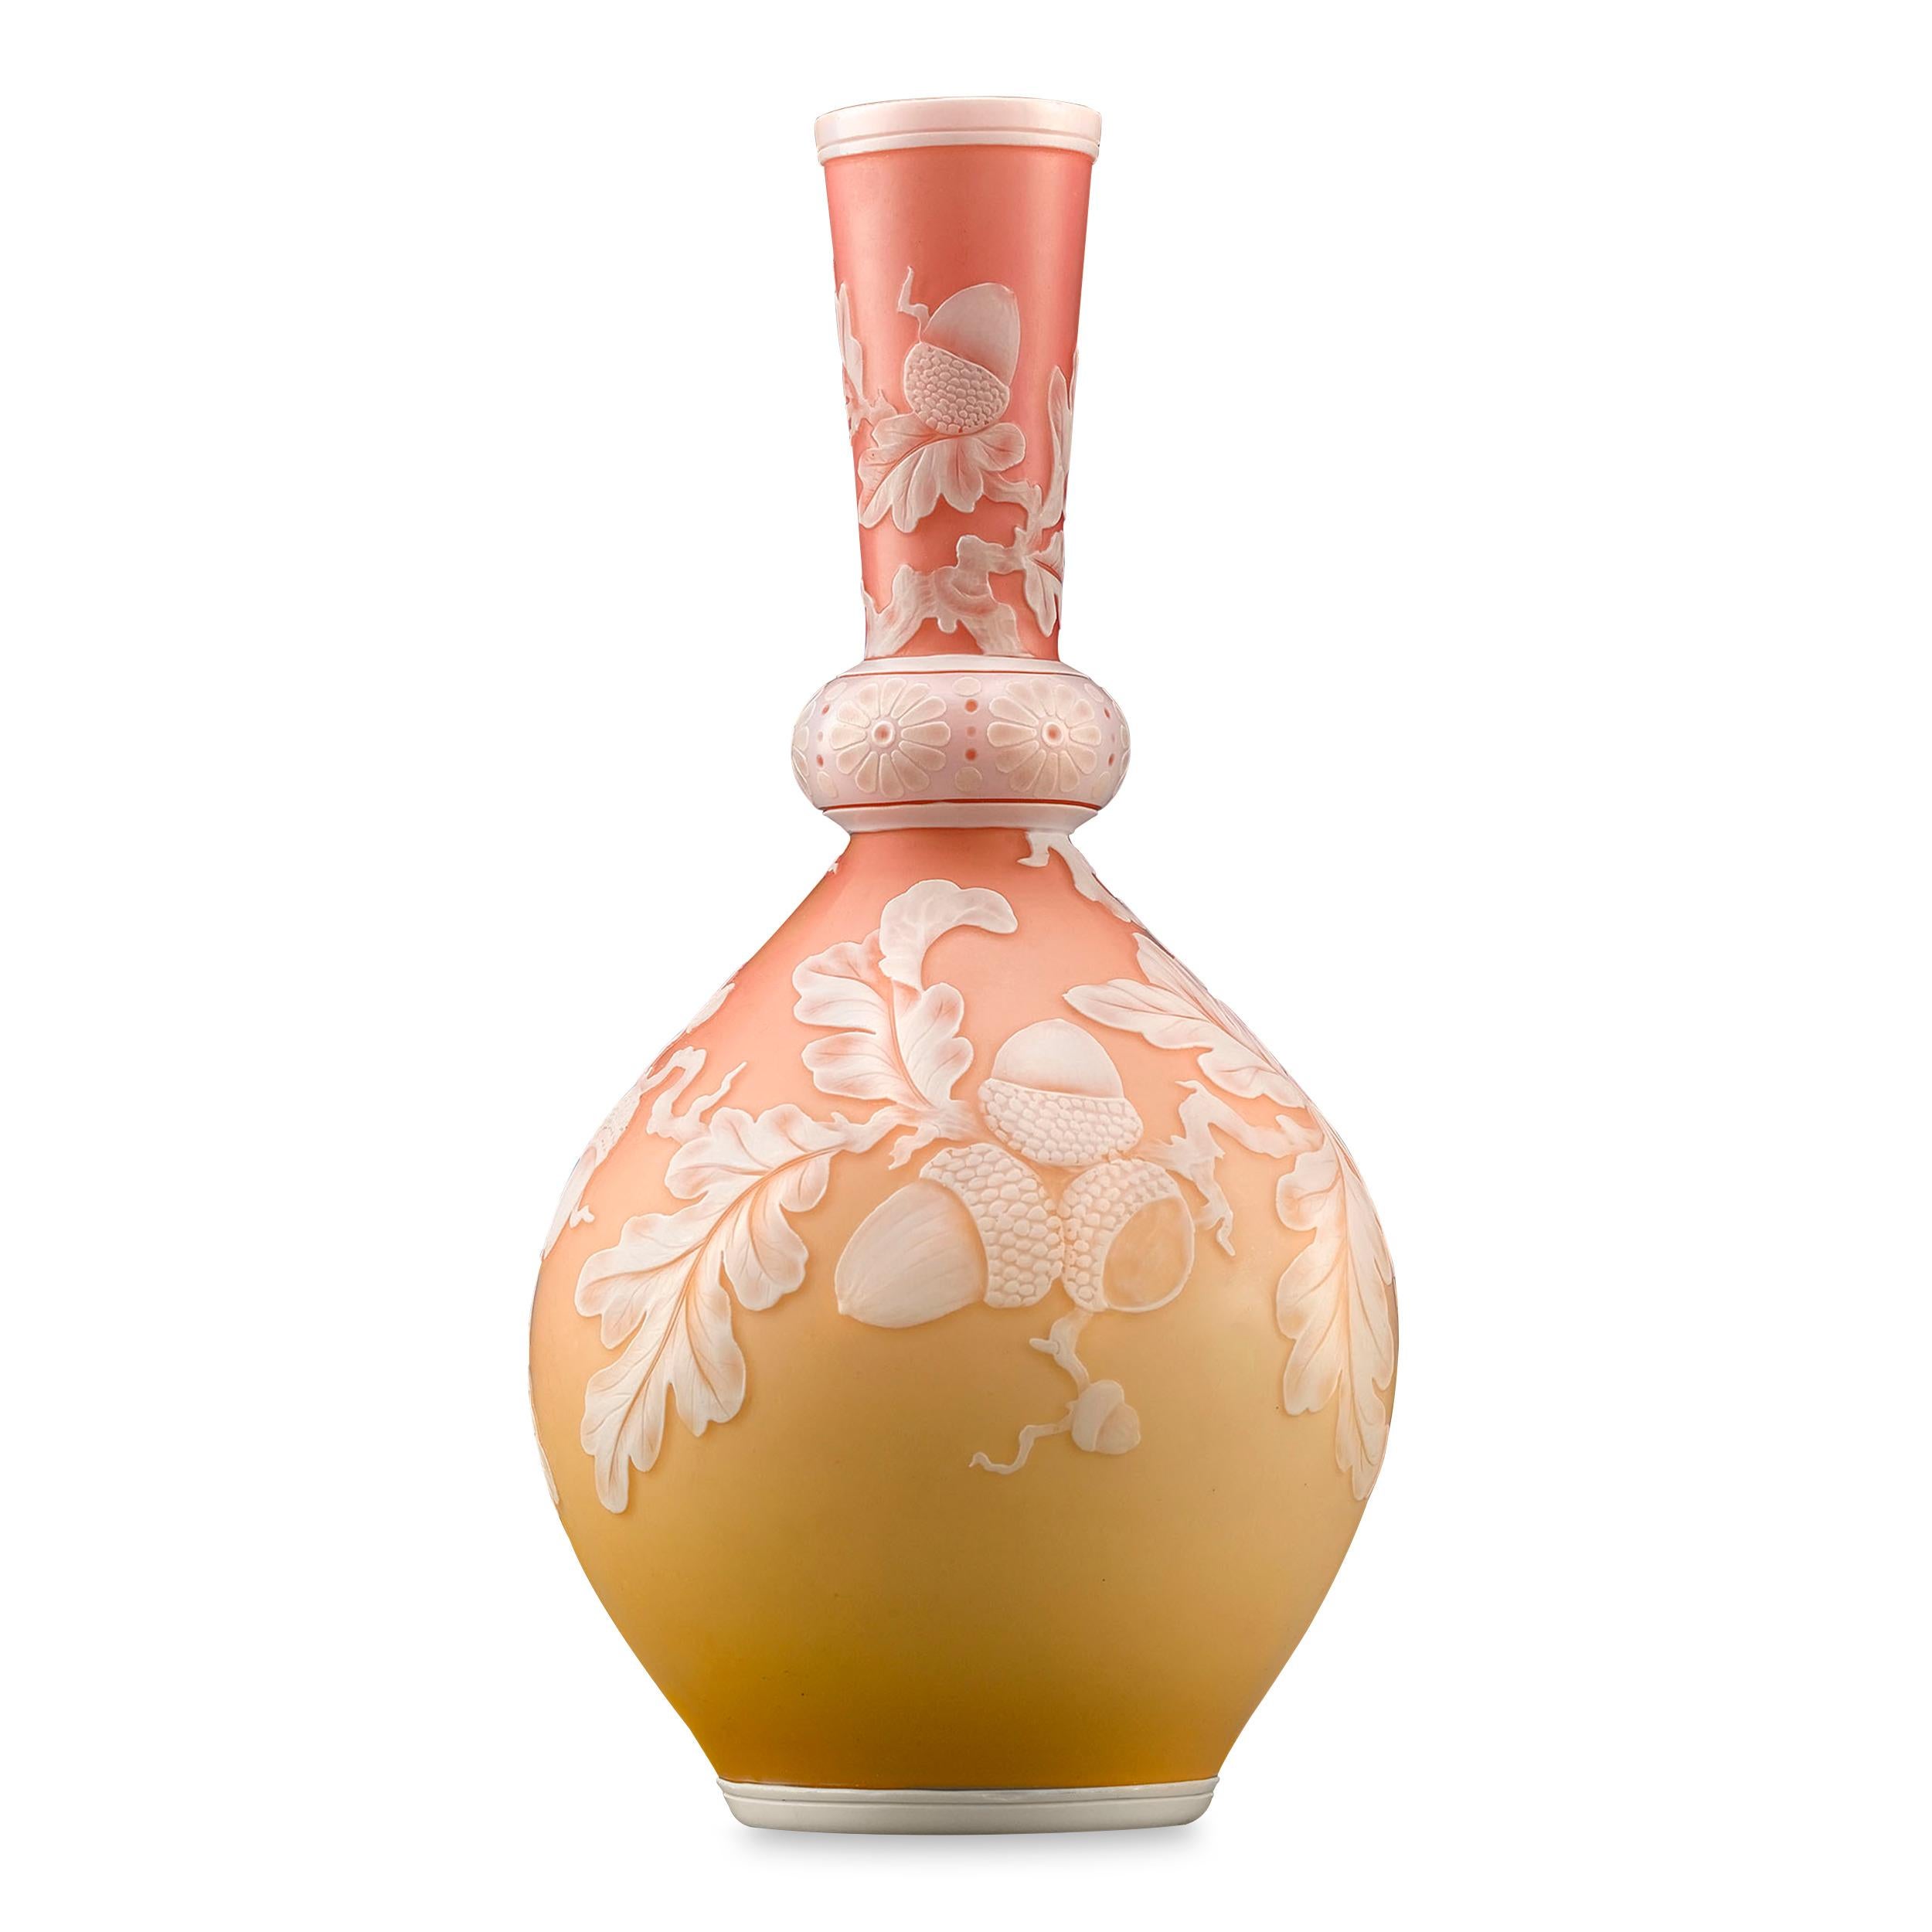 A lovely English peach cameo glass vase decorated with a leafy vine motif. Excellent condition.

Circa 1880

Measures: 5